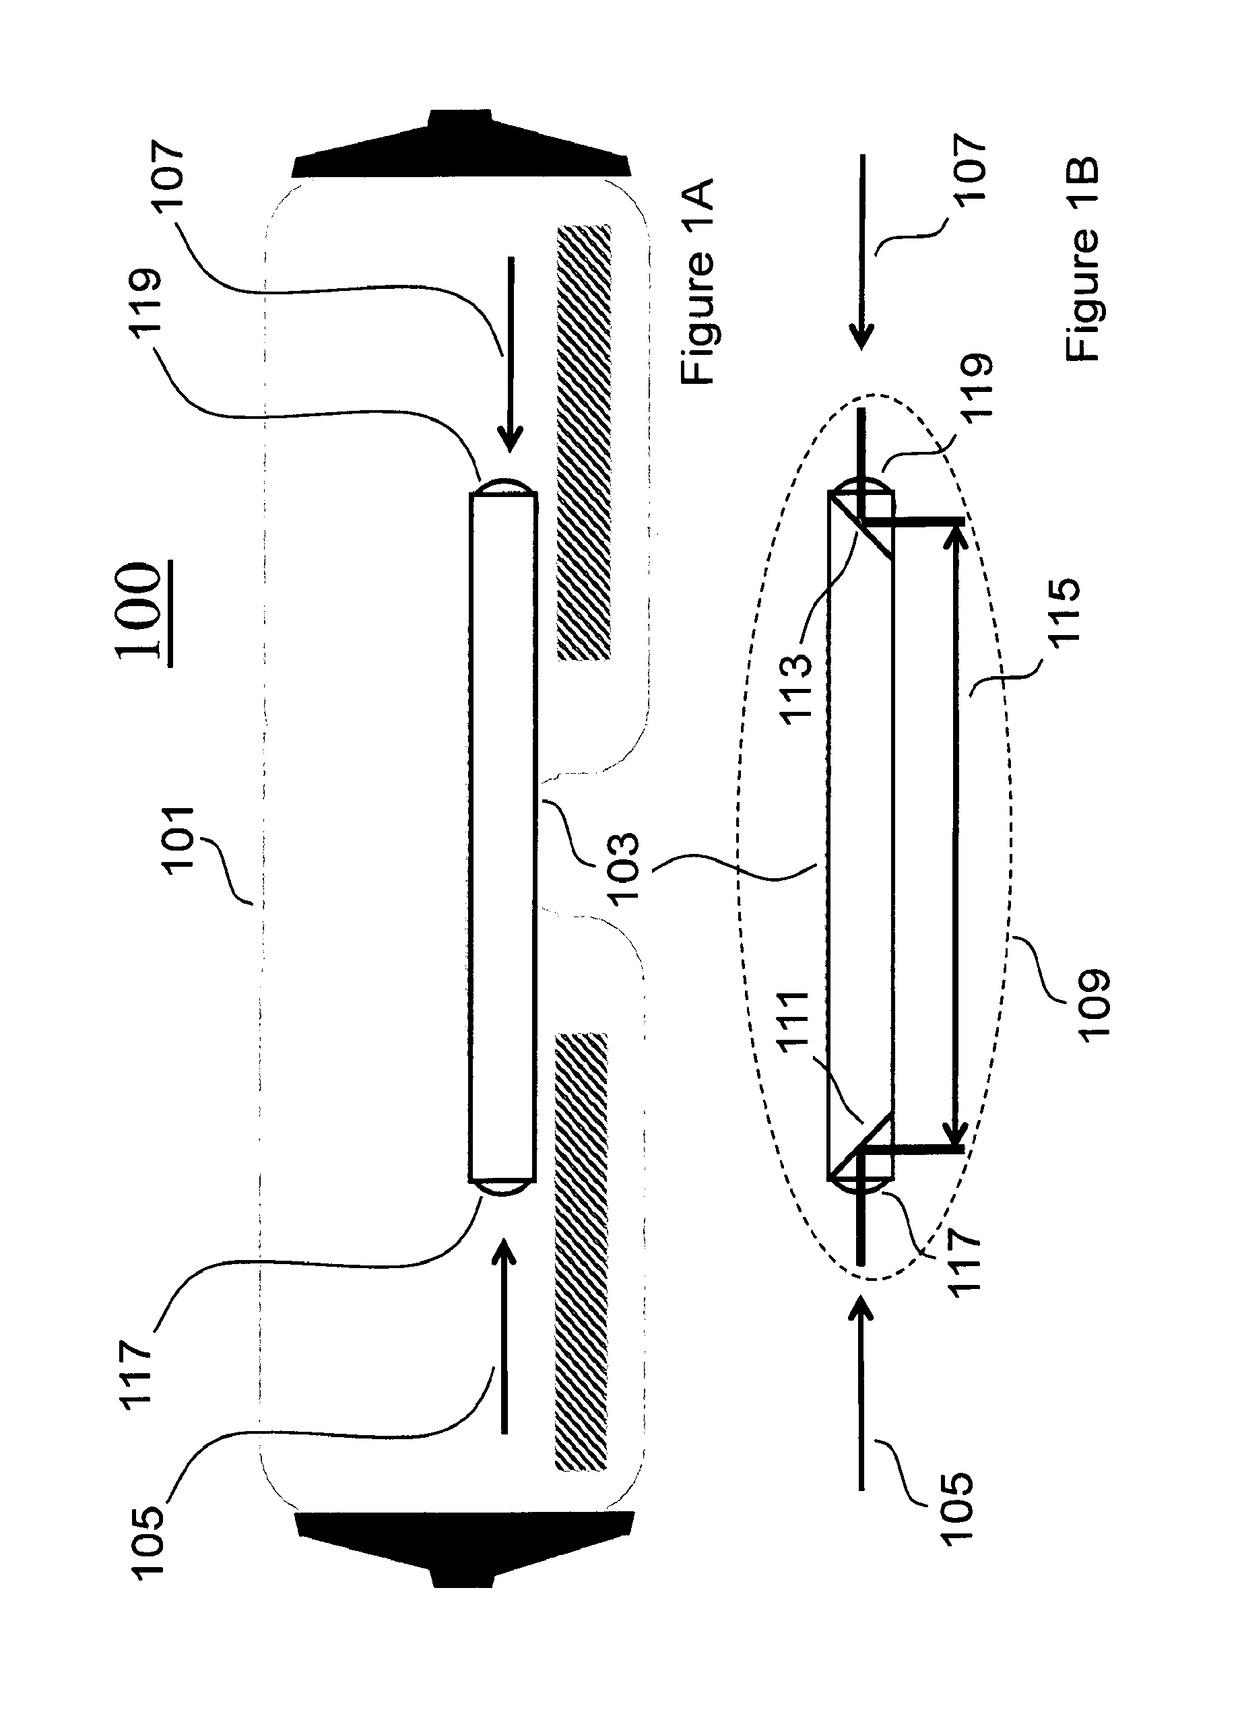 Head-mounted optical coherence tomography